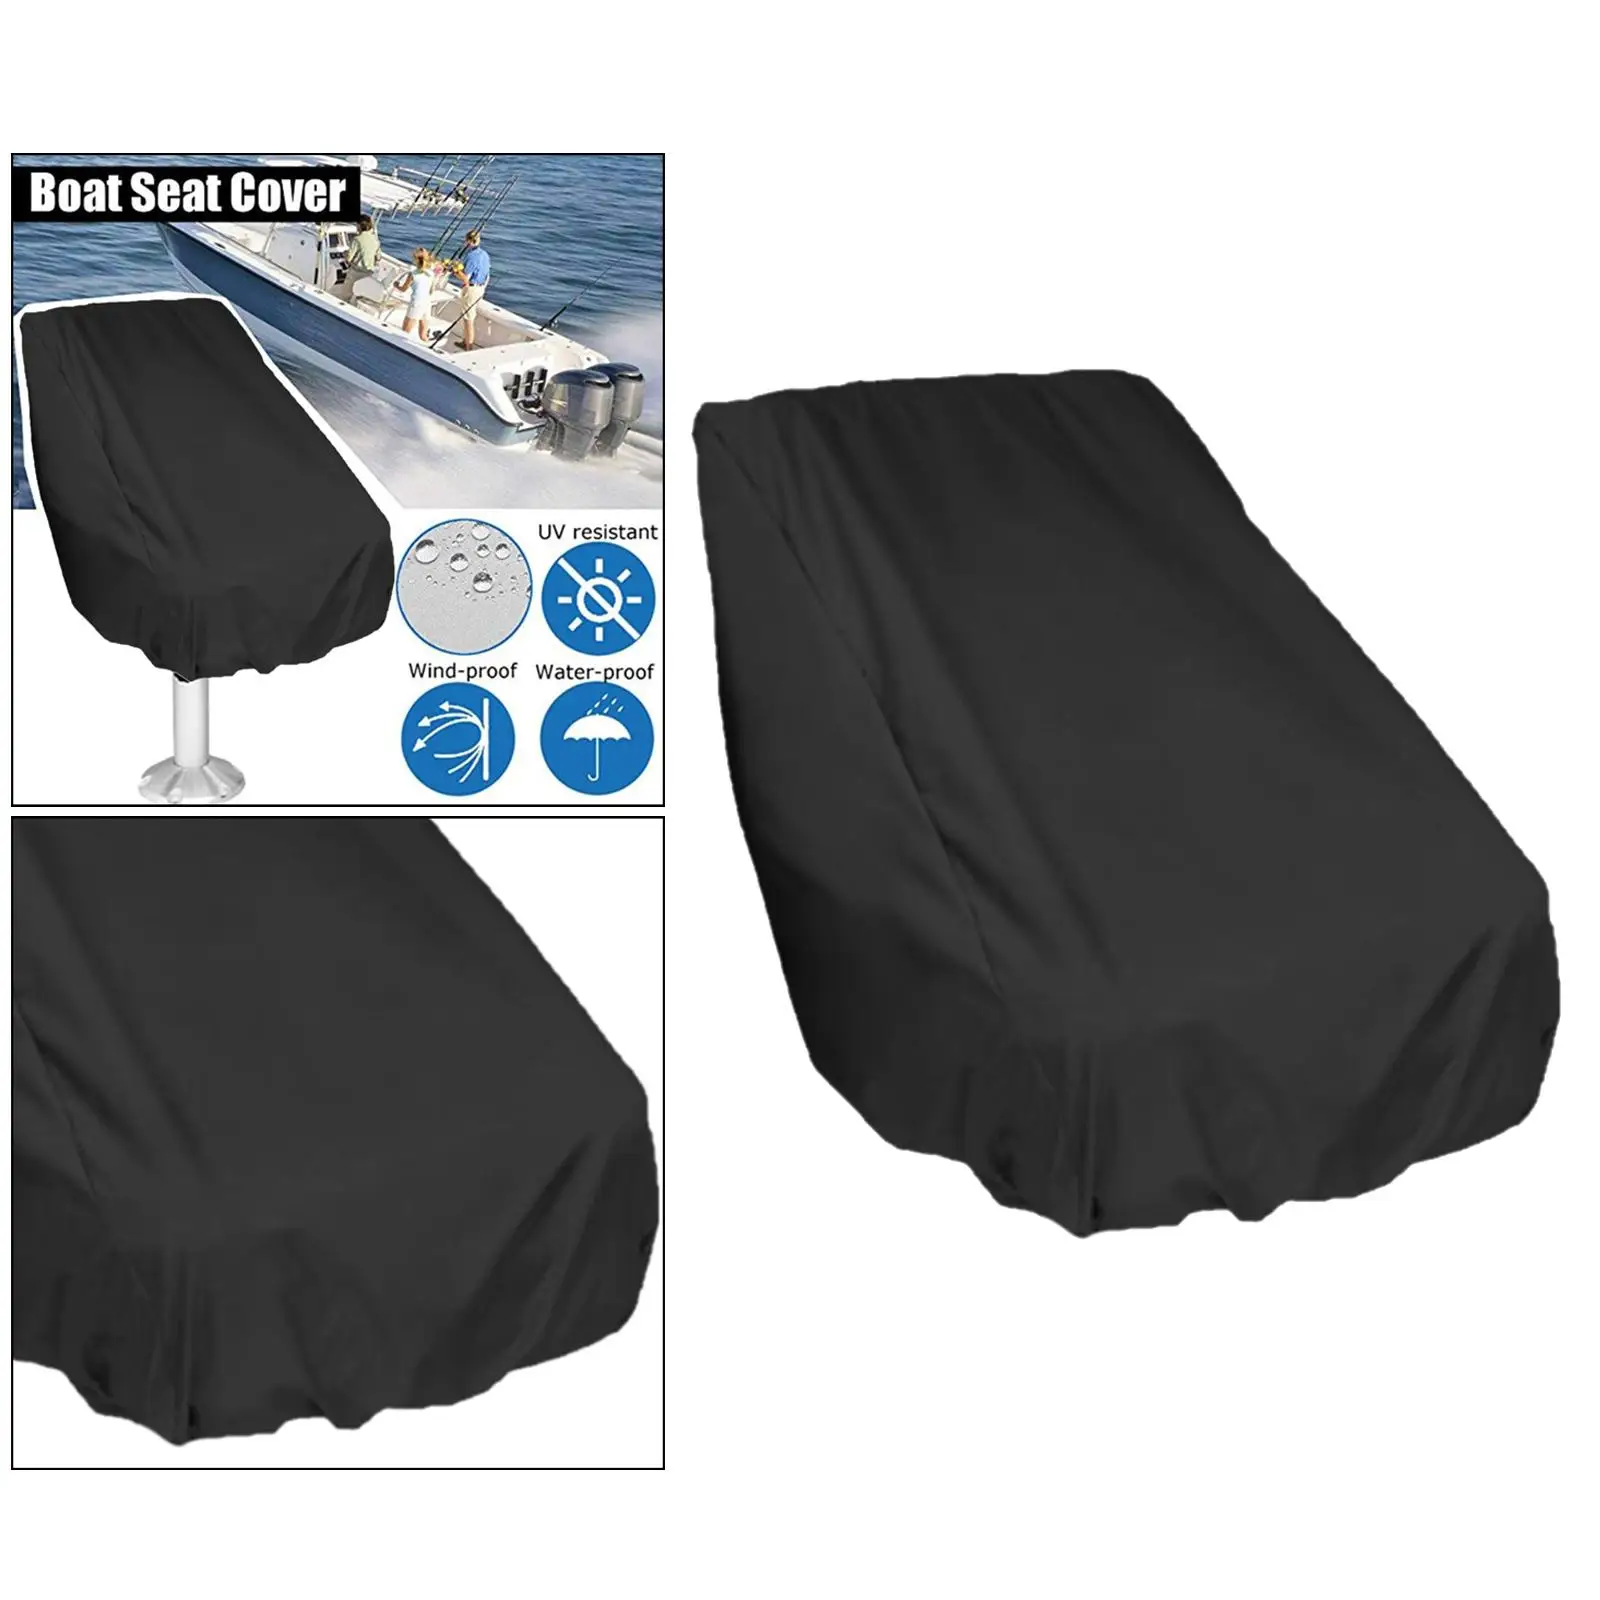 Seat Cover Boat Yacht Waterproof Protective Anti-High Quality